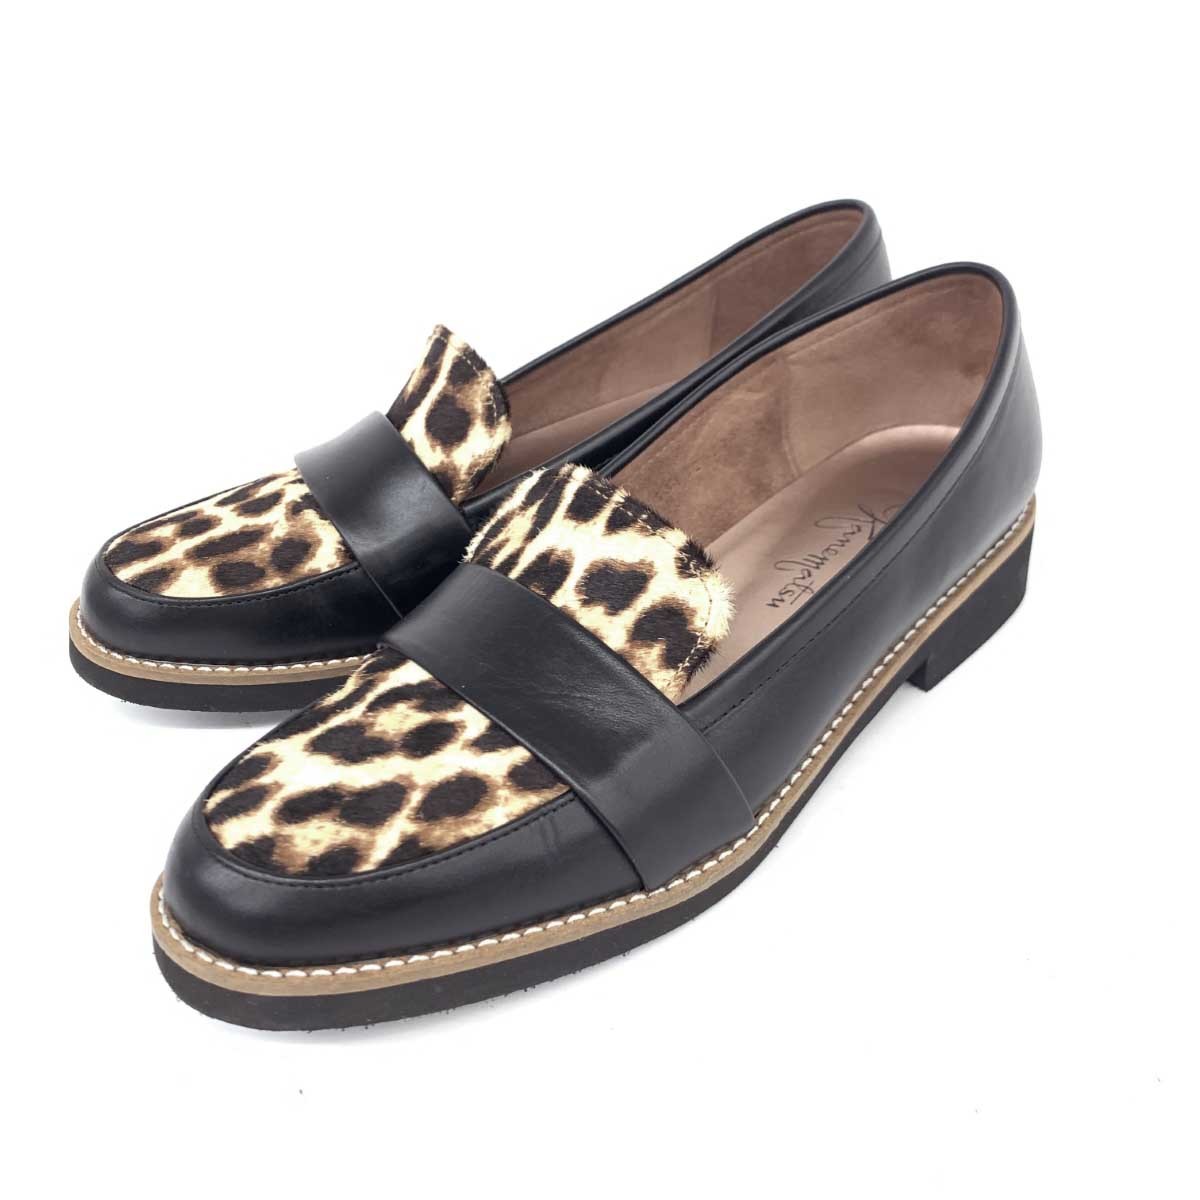  excellent * Ginza Kanematsu silver The kanematsu Loafer 23 1/2* black is lako Leopard pattern lady's shoes shoes shoes